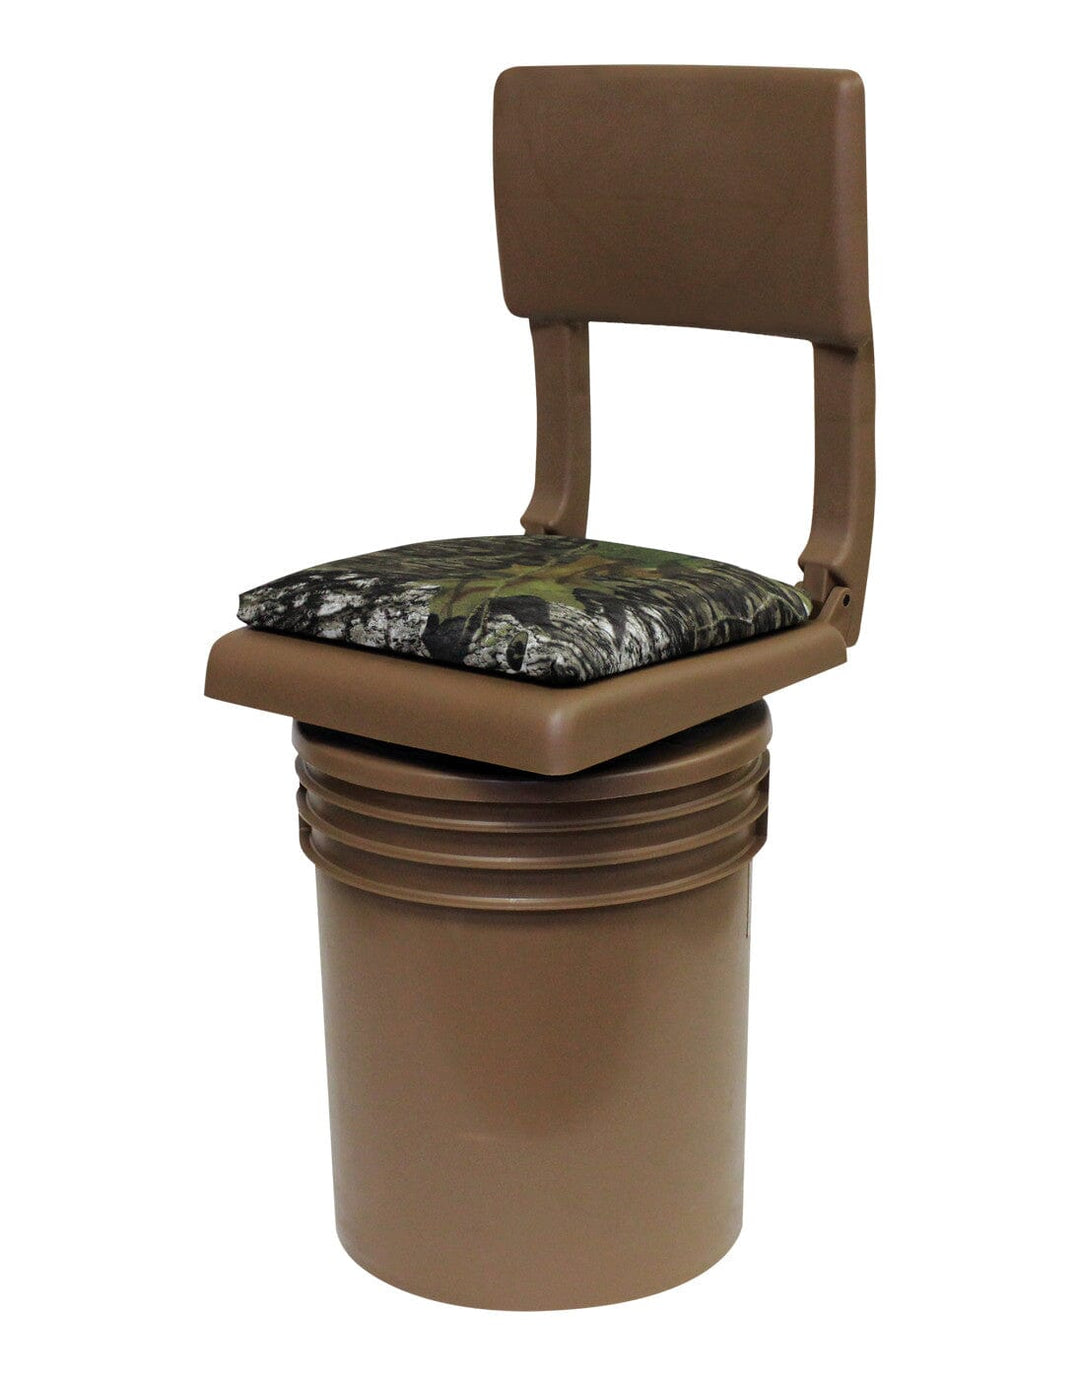 WD2200 Wise Outdoors Bucket 360 with Silent Swivel and Folding Seat